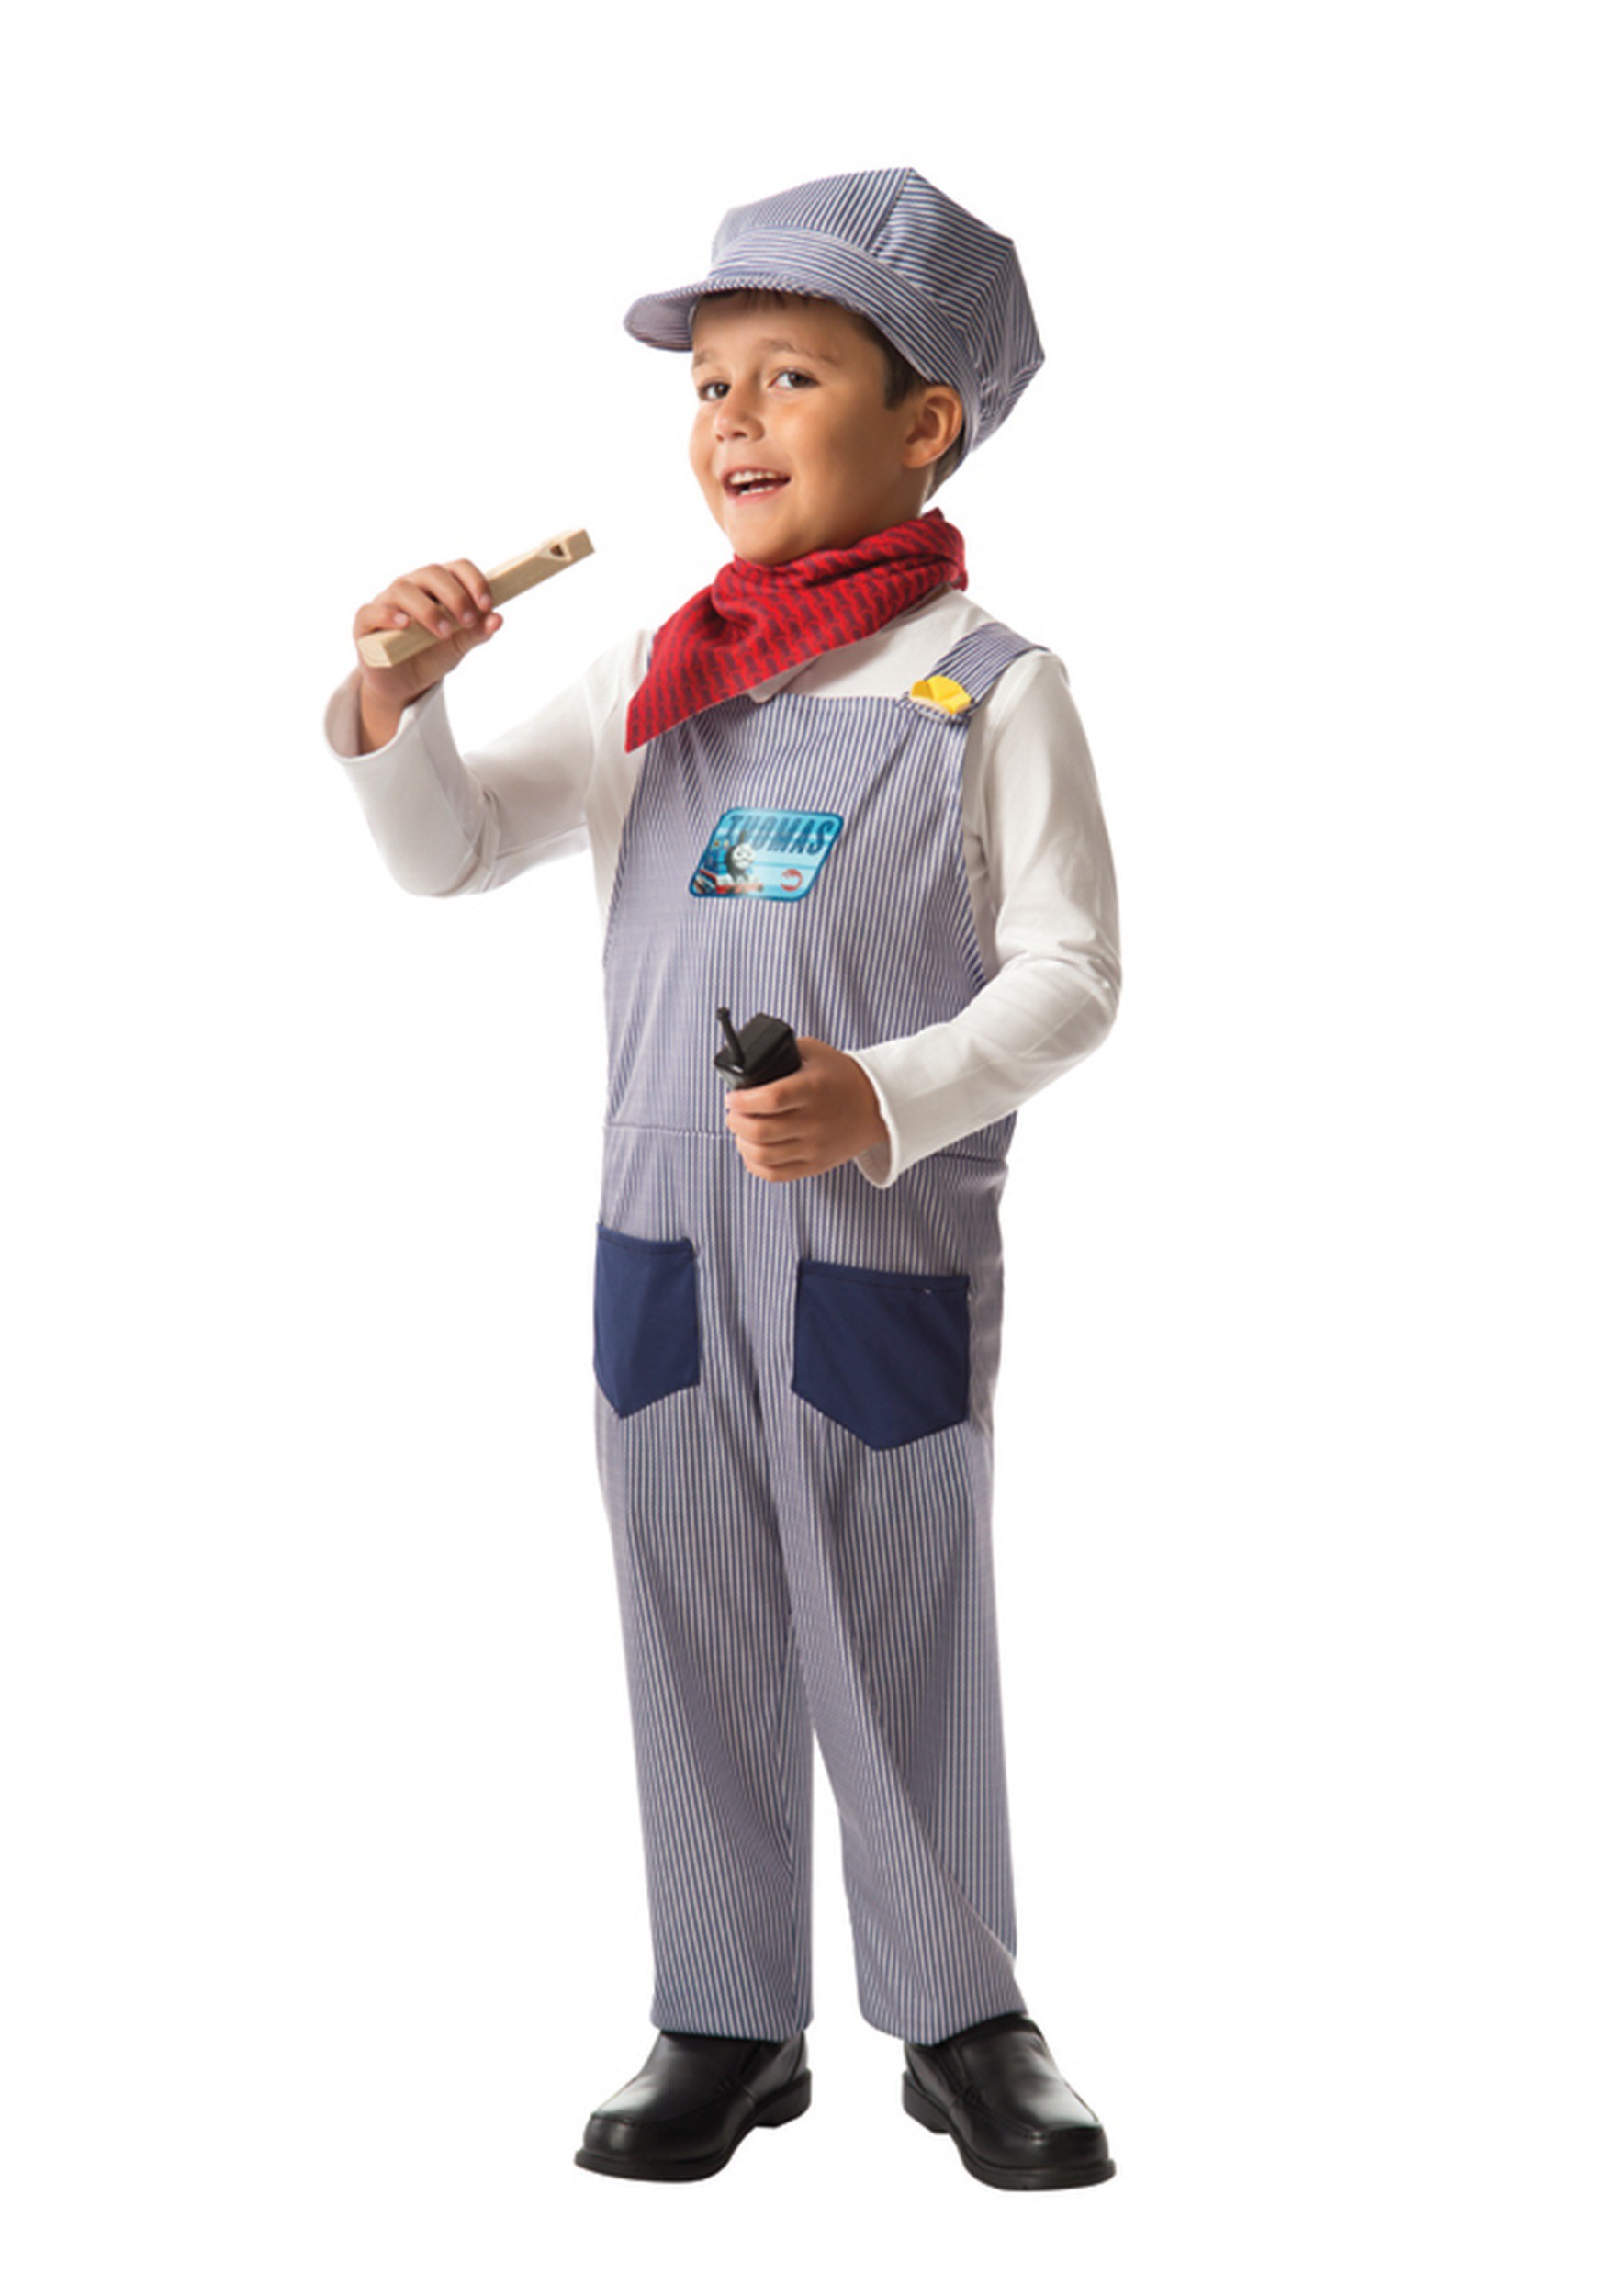 Thomas and Friends Conductor Accessory Dress Up Costume Kit